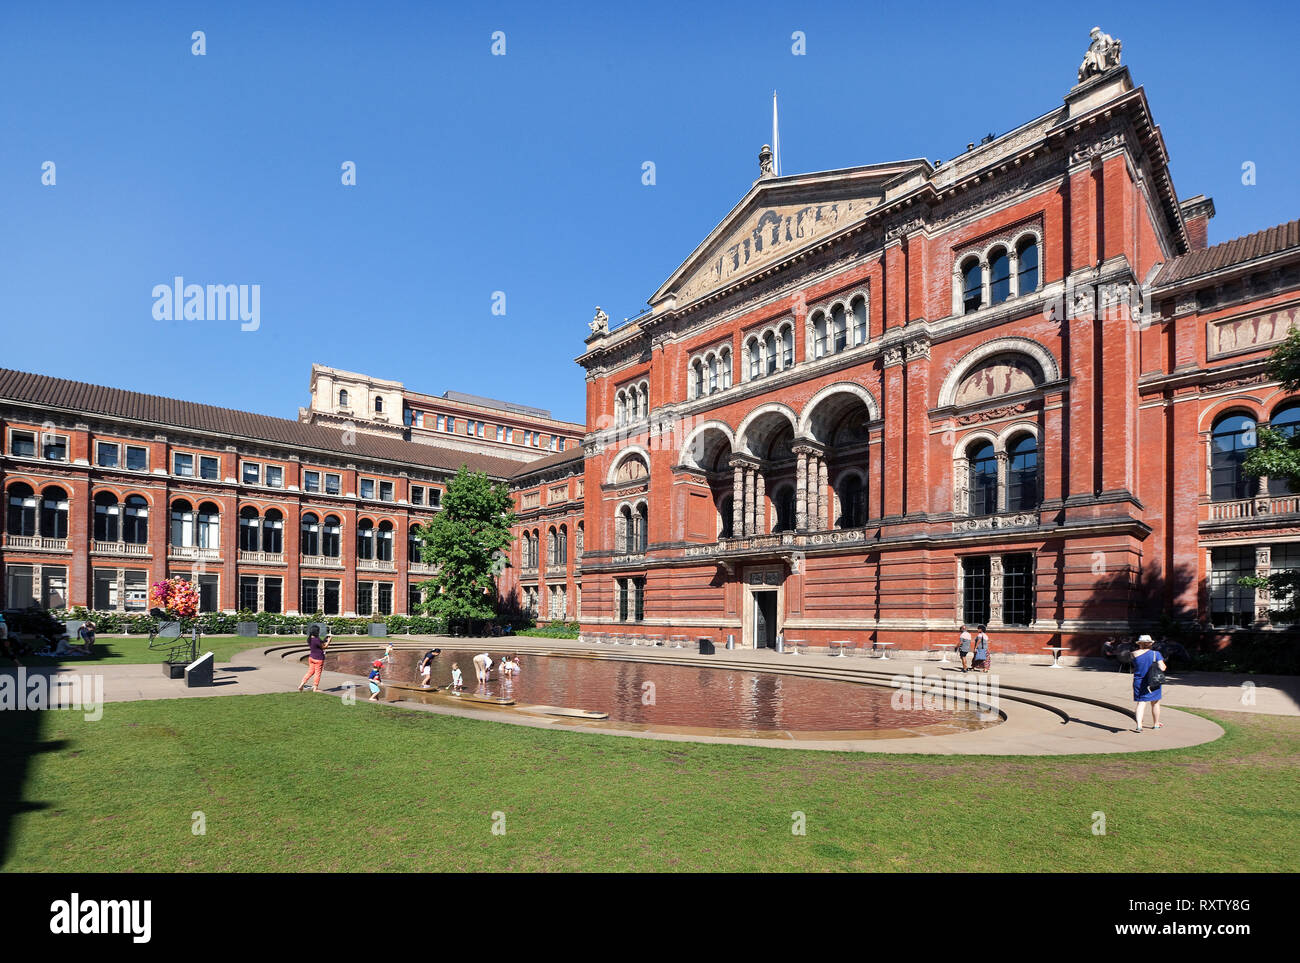 Lecture Theatre Block on the north side of the John Madejski Garden that make up the Quadrangle at the Victoria & Albert Museum, London, United Kingdom Stock Photo